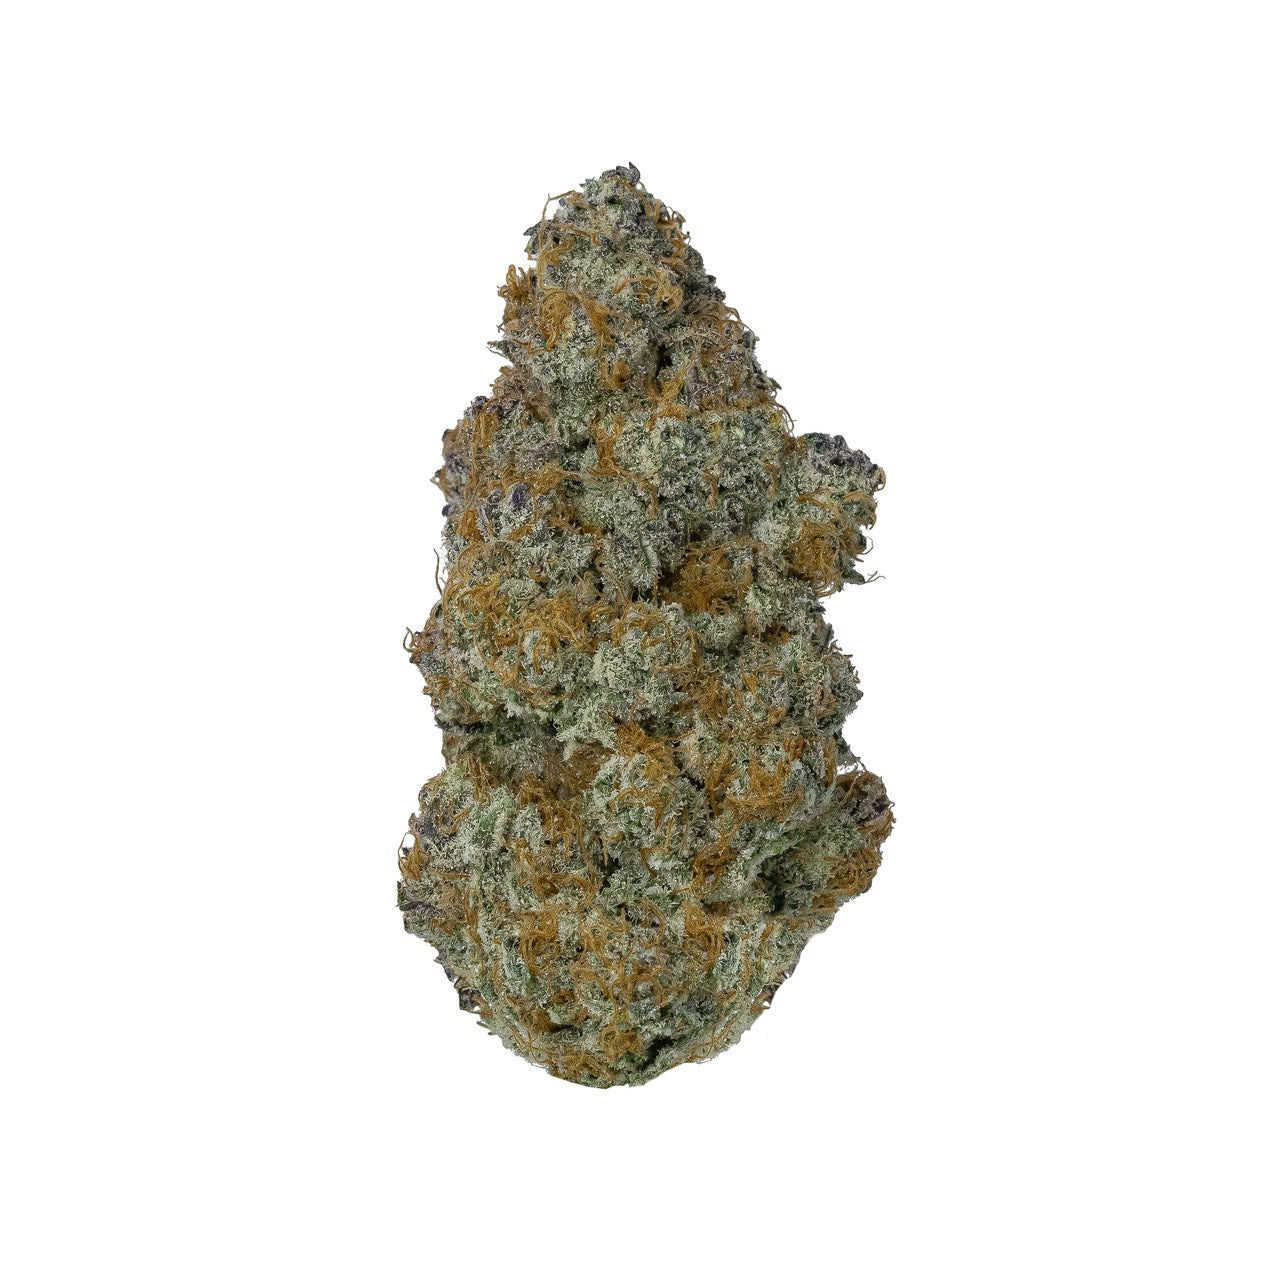 A nug of cannabis flower from the GMO Cookies strain sits against a white background.